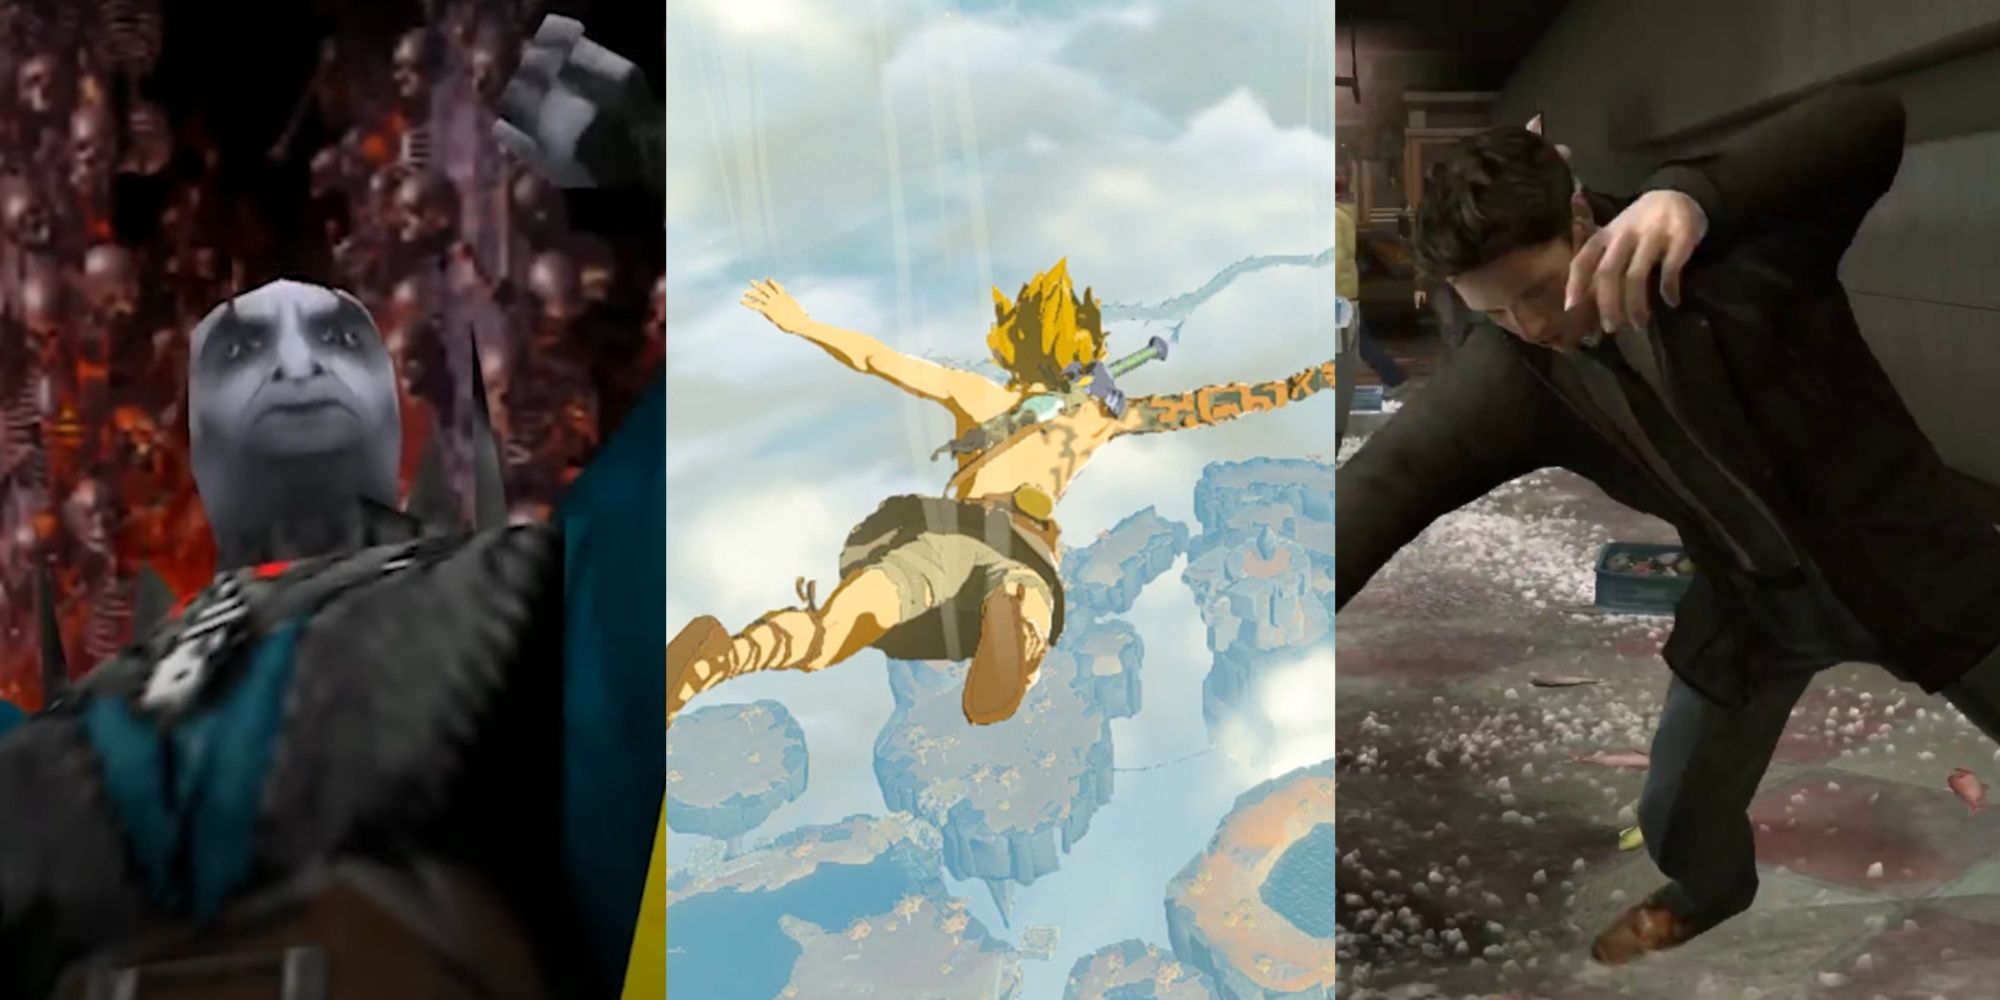 Quan-Chi in Netherrealm, Link skydiving, and Jayden falling in a supermarket